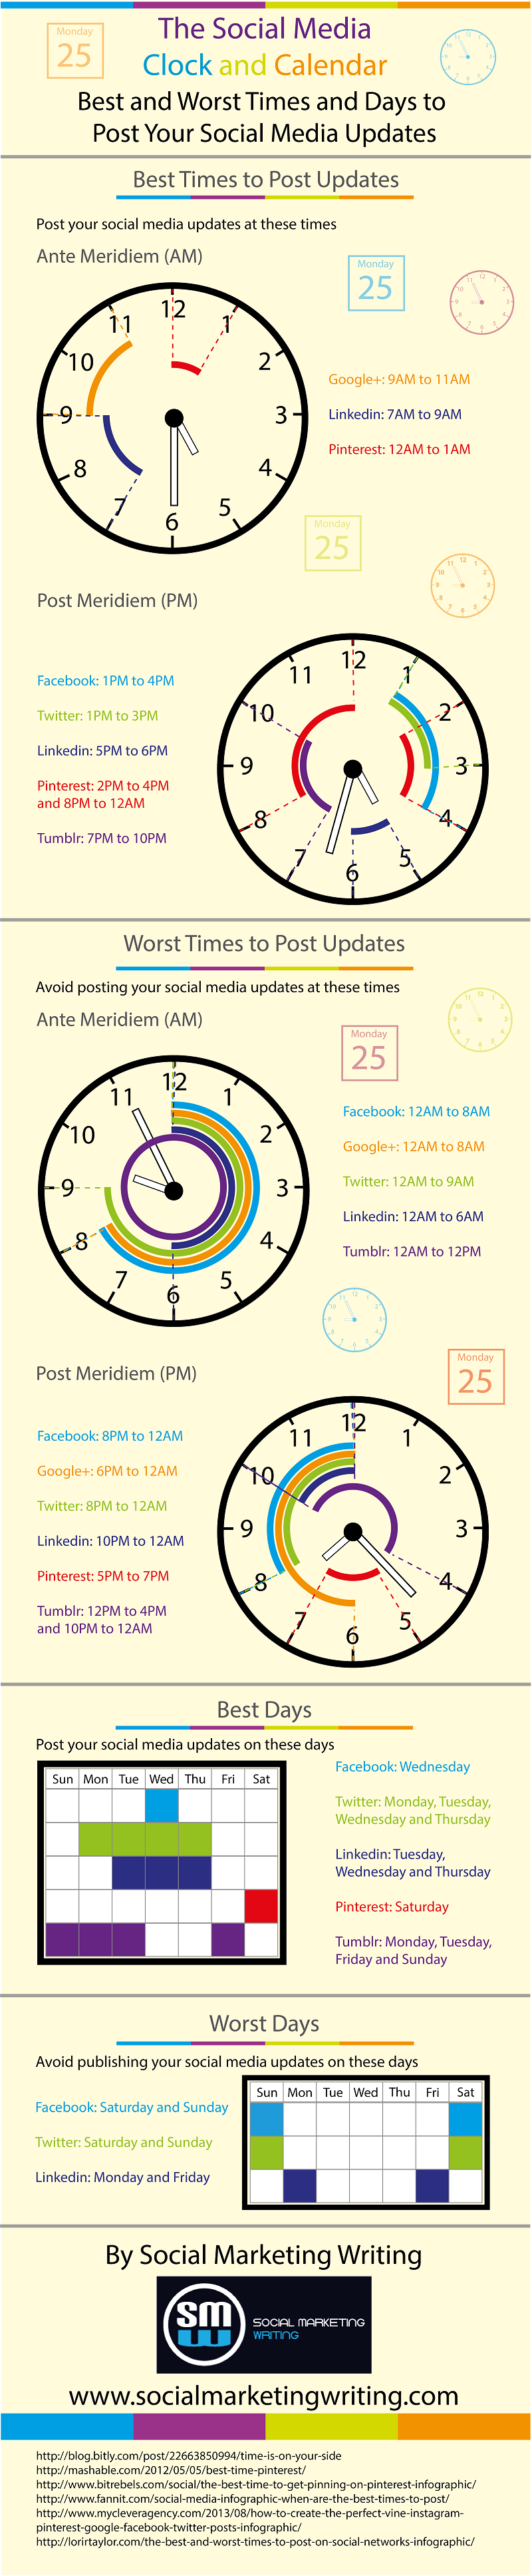 Best and Worst Times and Days to Post Your Social Media Updates [Infographic]